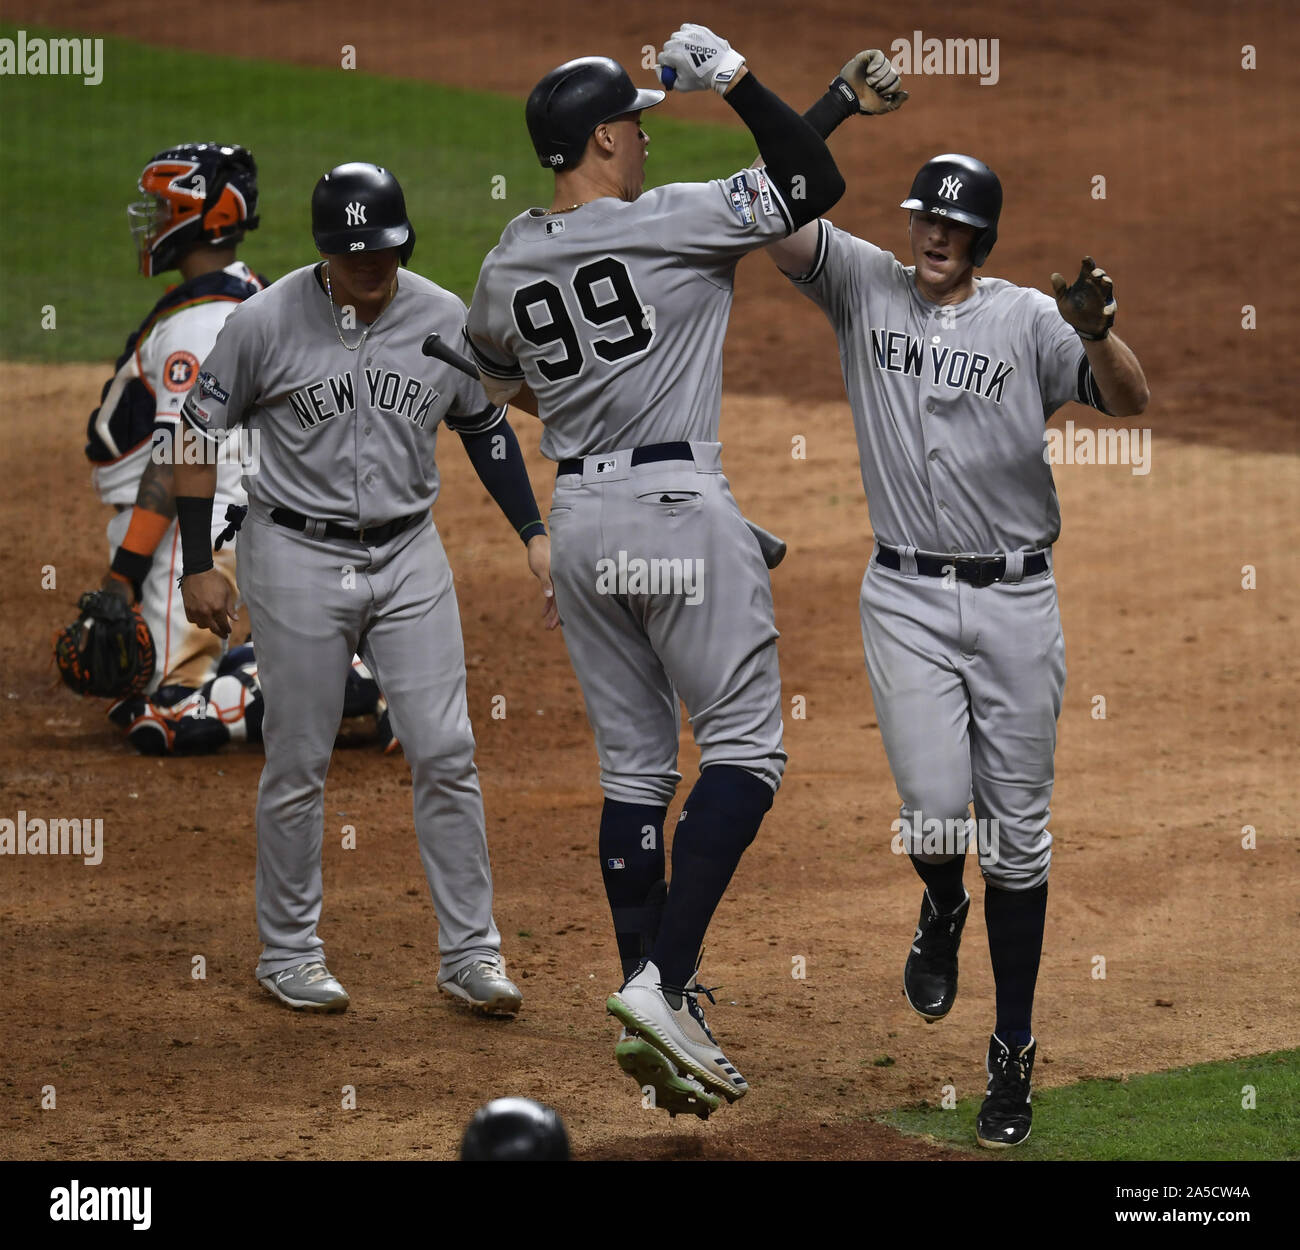 2009 World Series Game 5 - Mangin Photography Archive